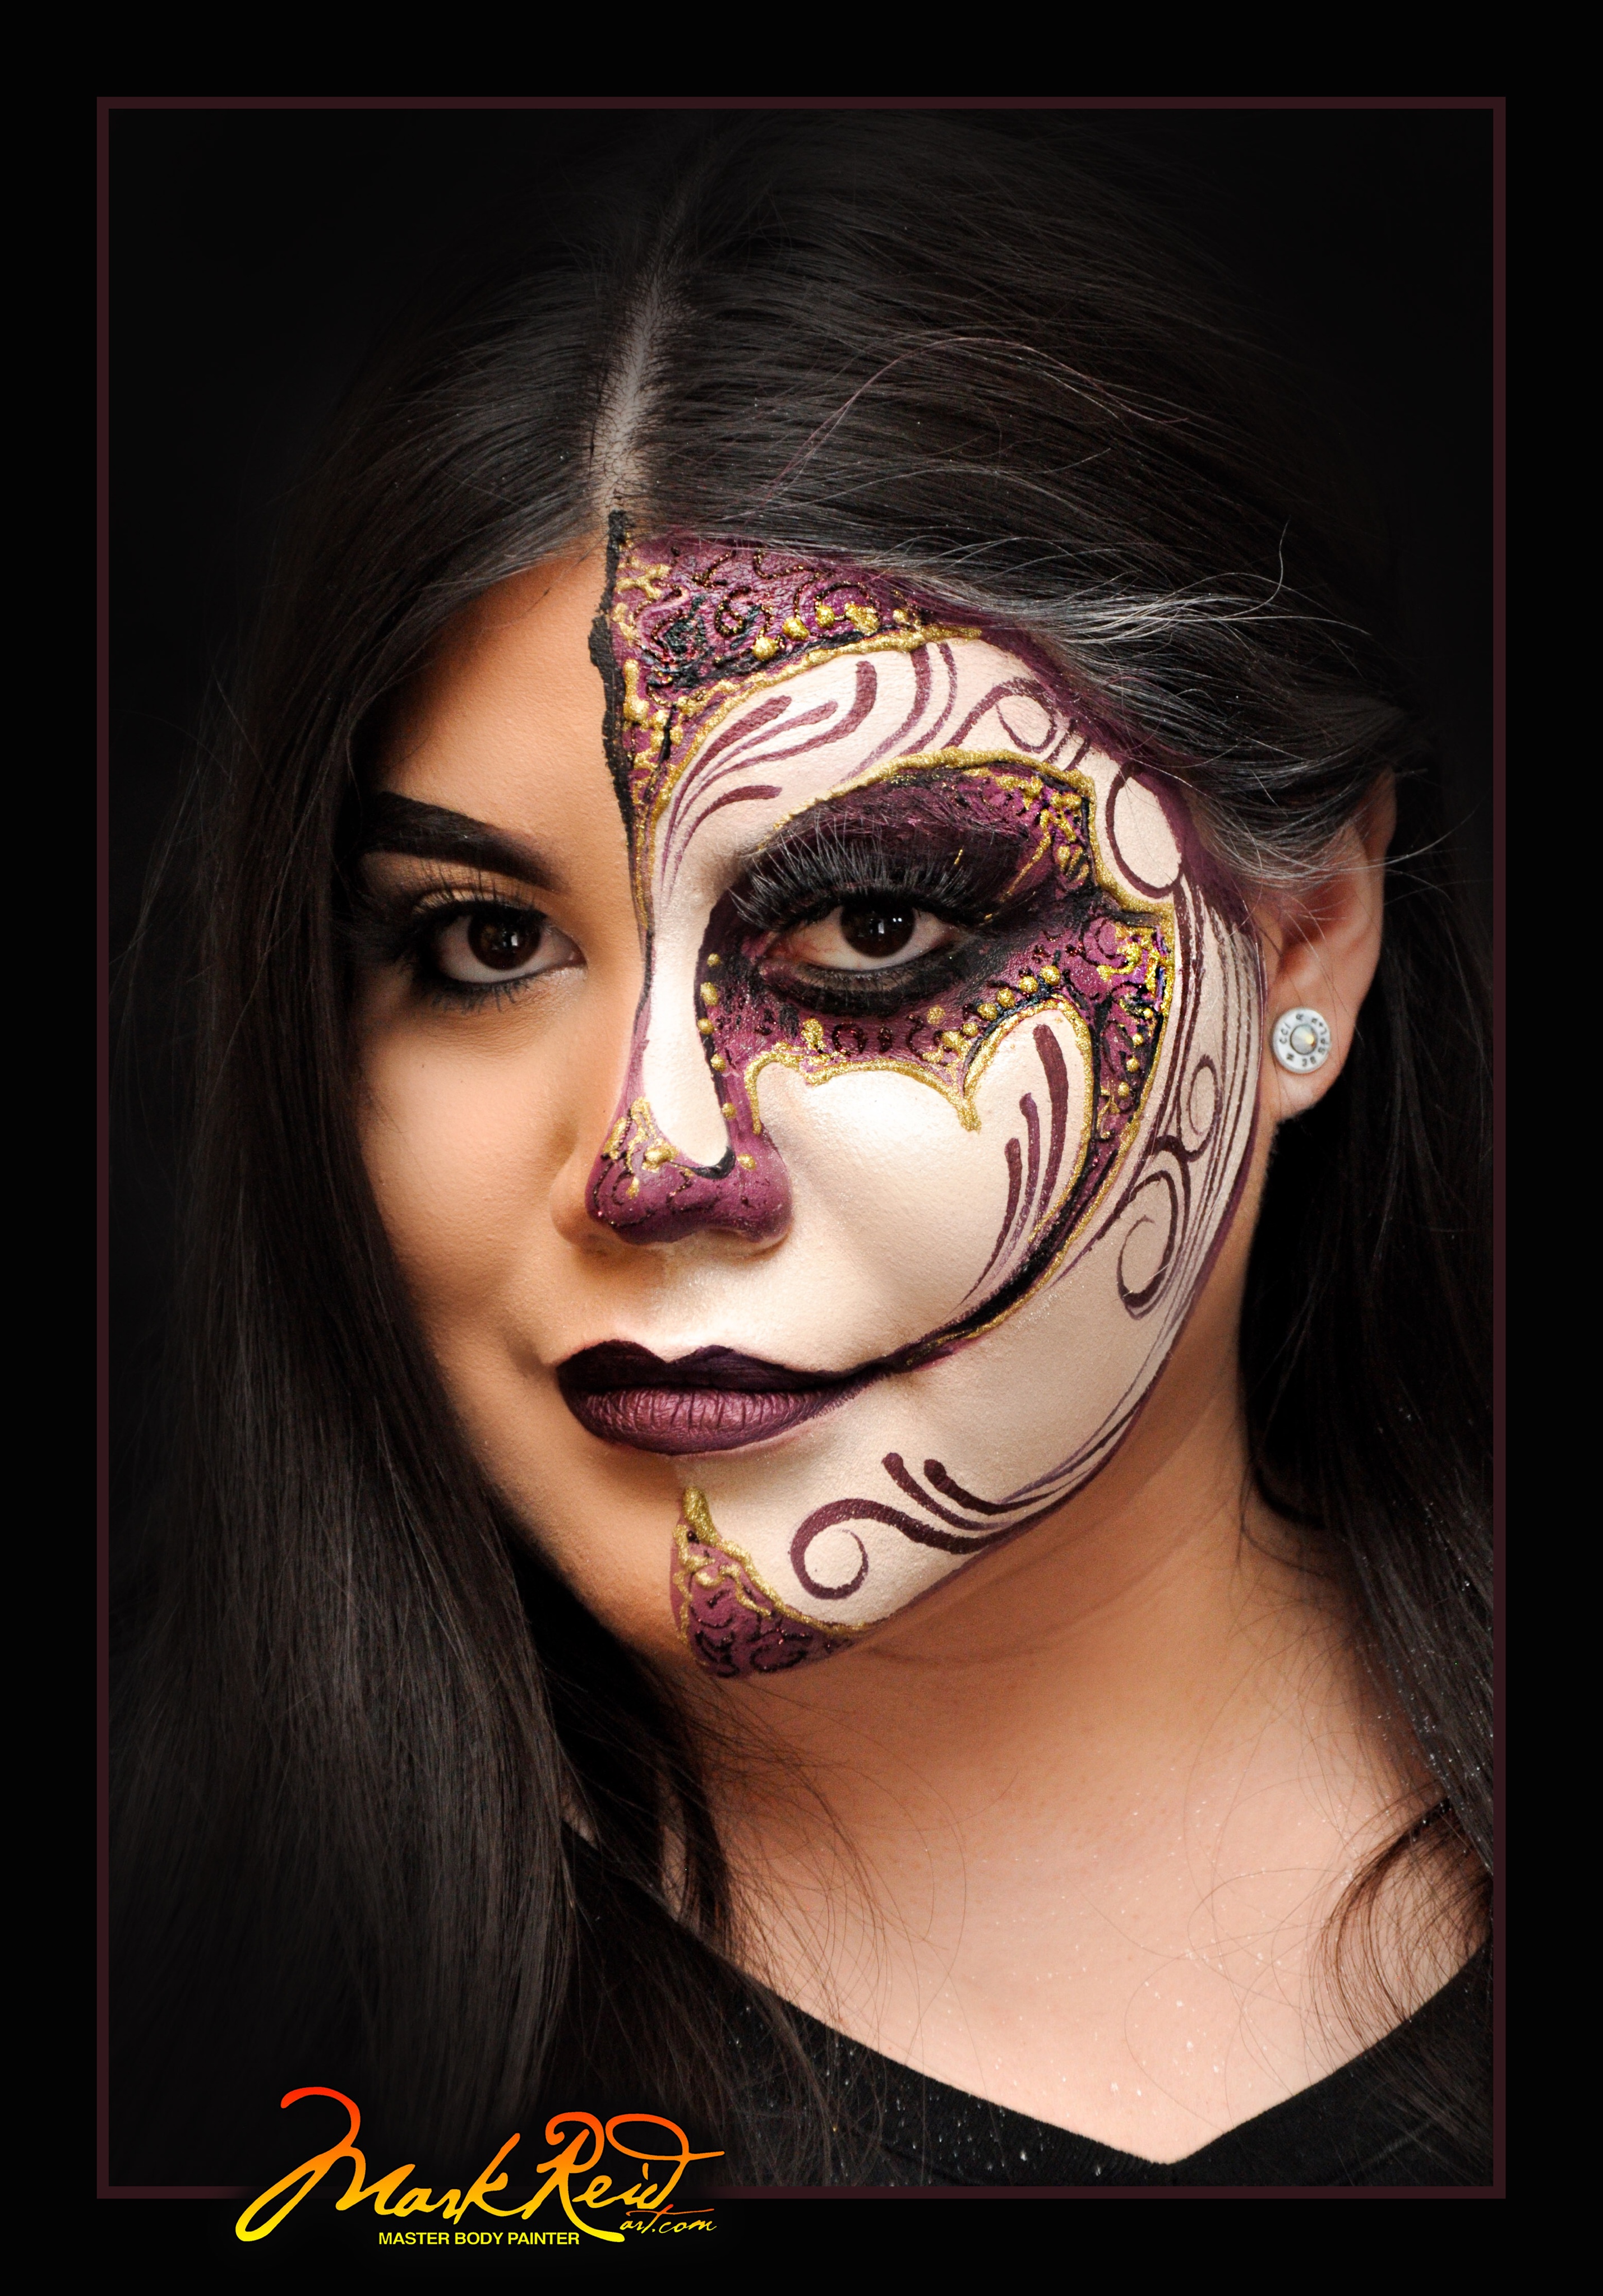 Beautiful woman with the right side of her face painted in a very stylized flowing style that has a white base and intricate swirling patterns around her eye and mouth